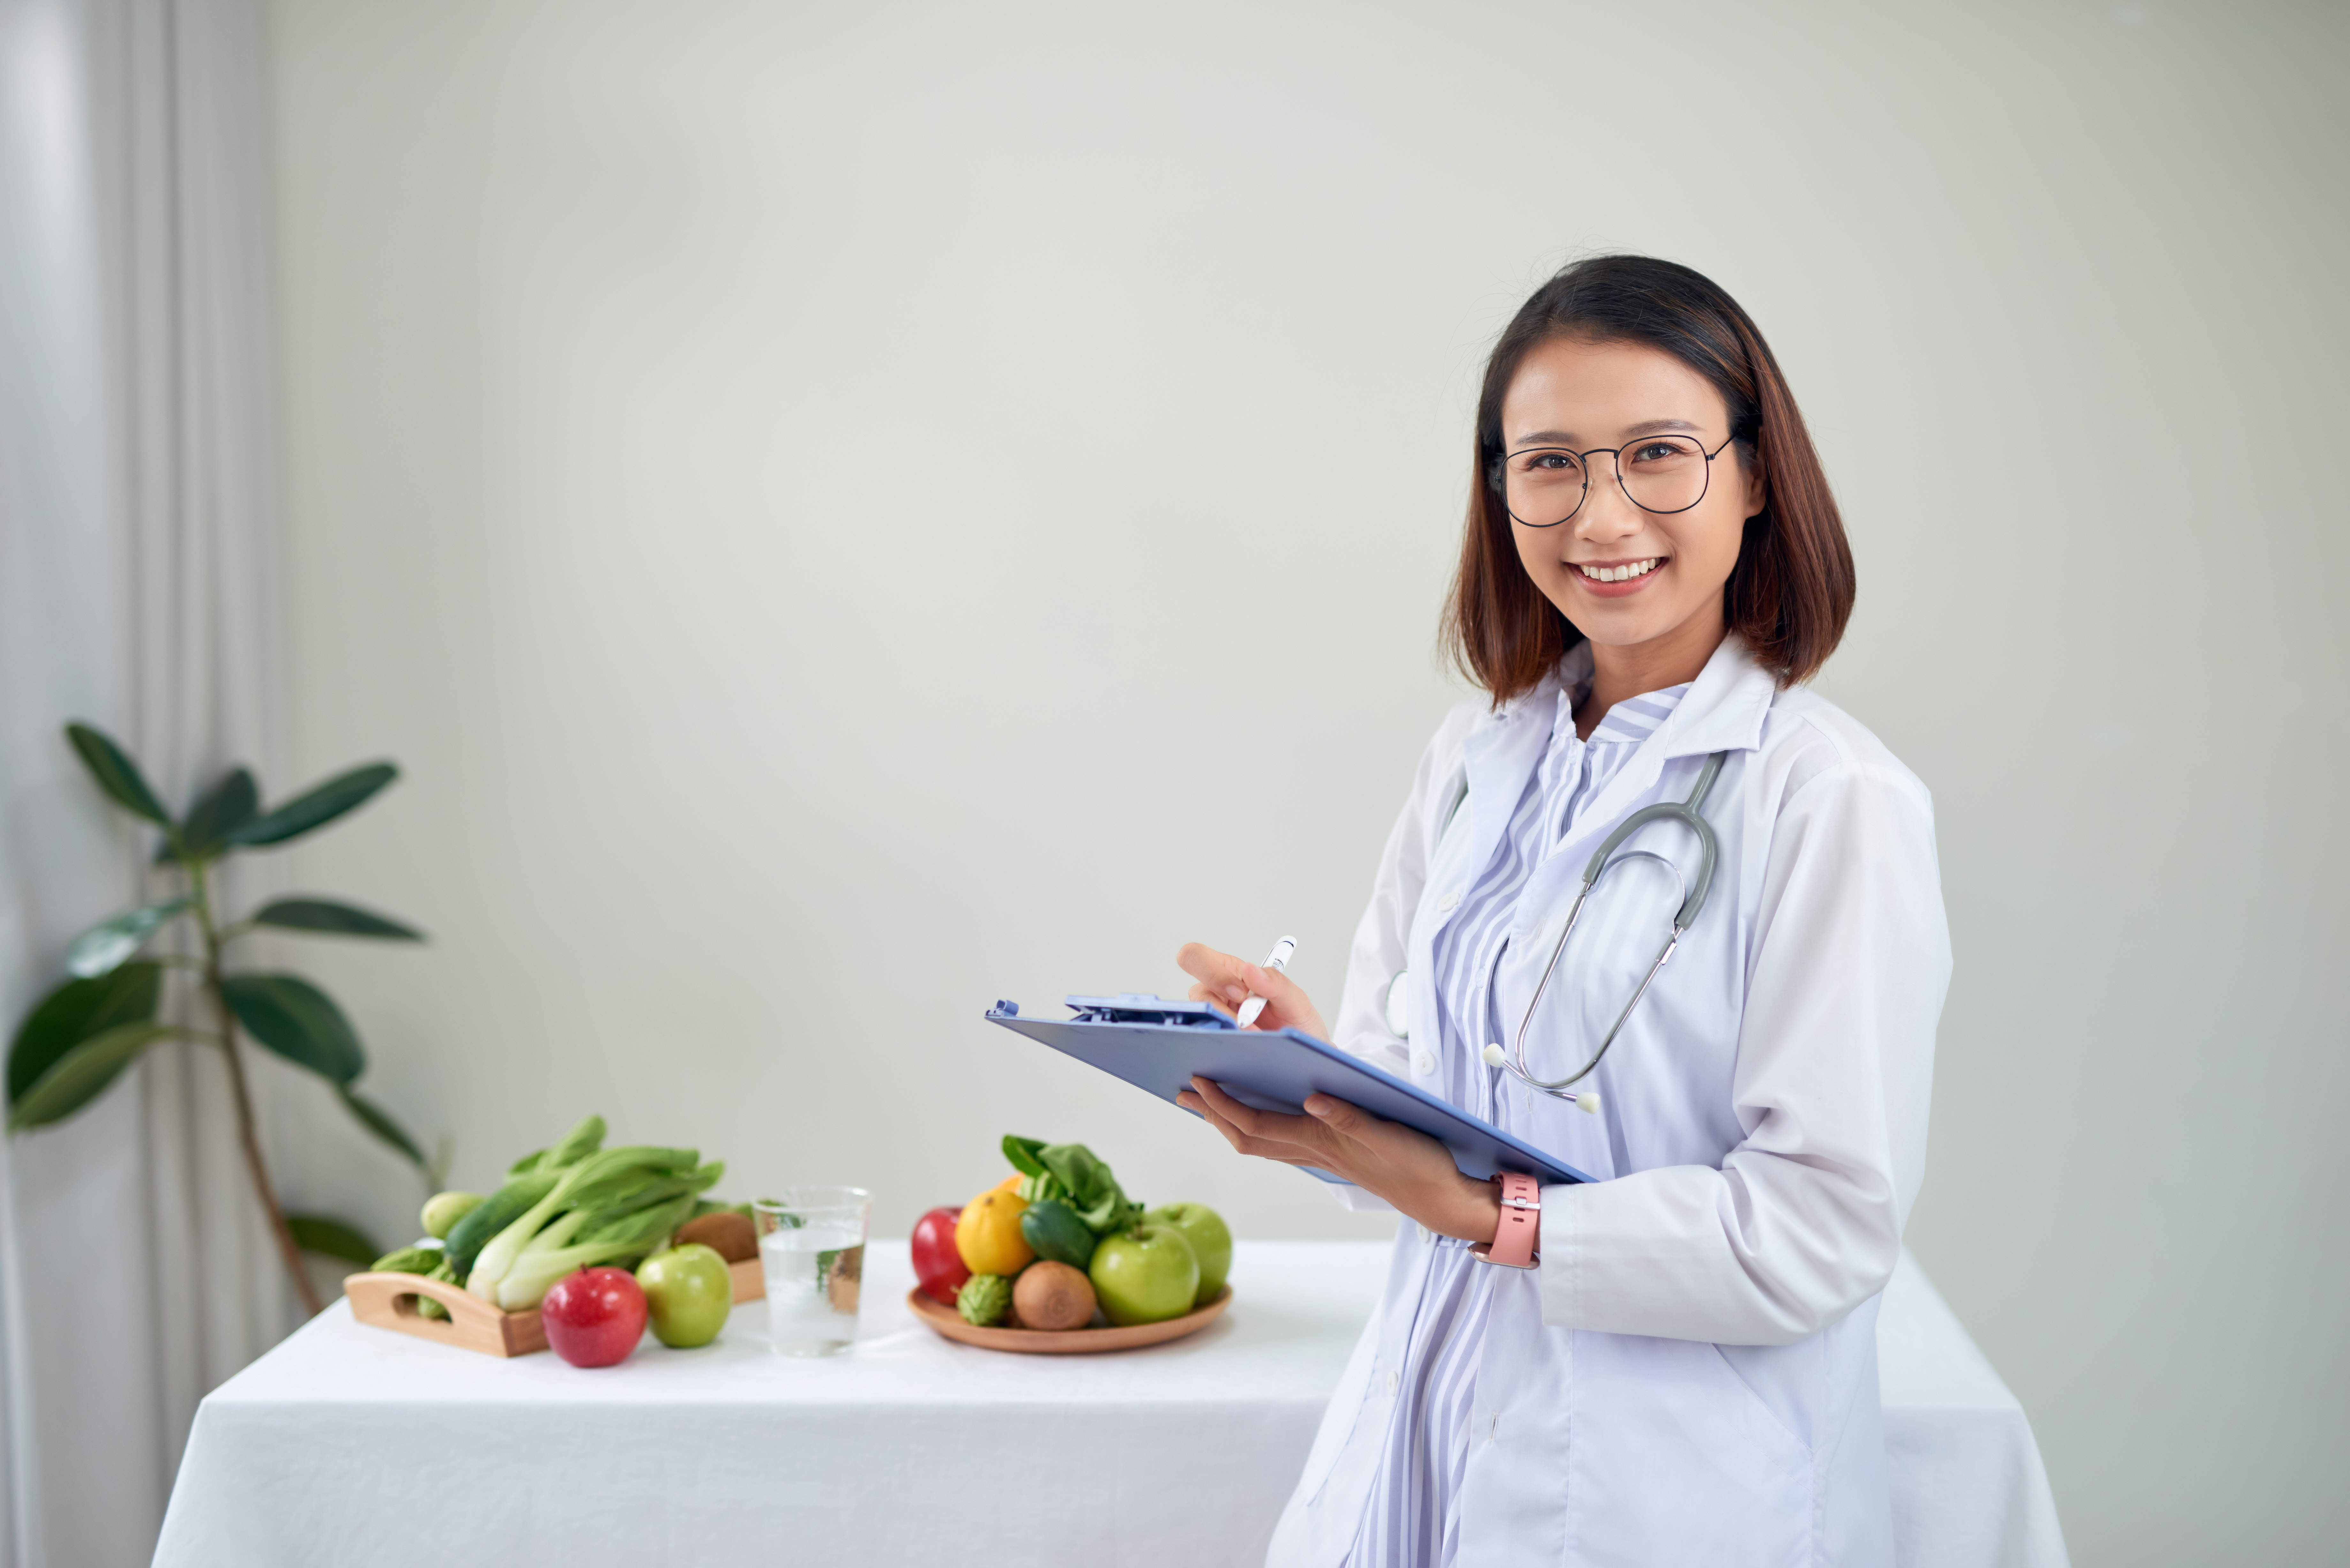 What you need to know about becoming a nutritionist